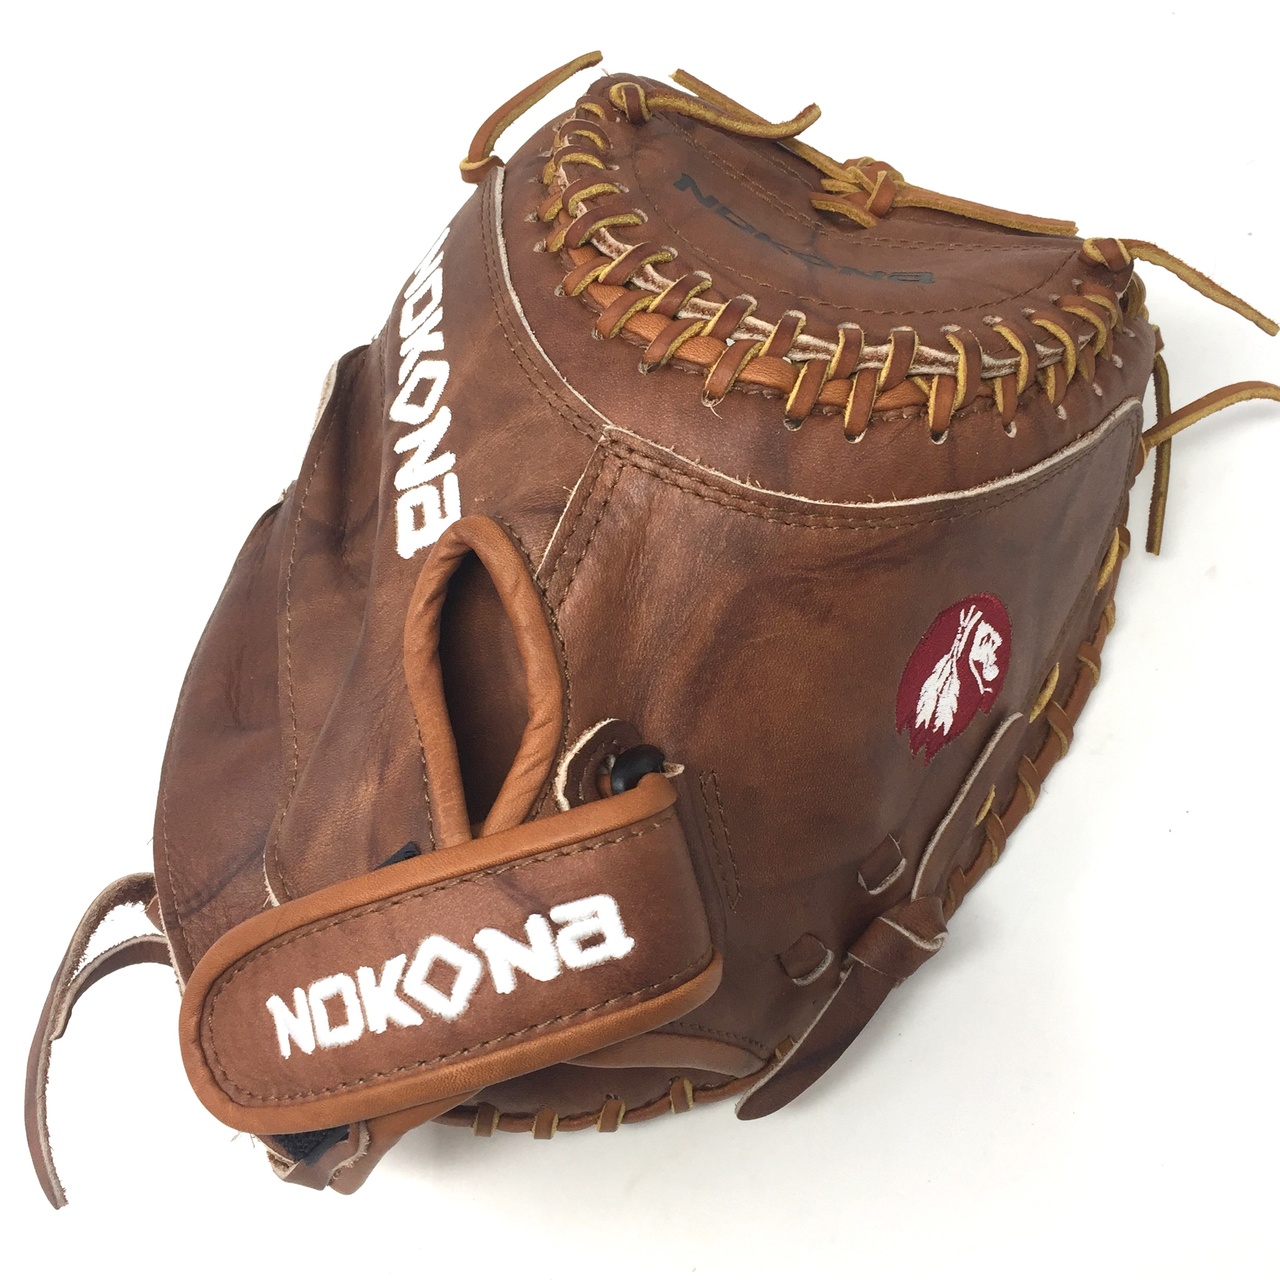 Premium Walnut Crunch 32.50 Nokona's Walnut Series Great Stability and Durability Near game-ready break in time. Inspired by Nokona’s history of handcrafting ball gloves in America for over 80 years, the proprietary Walnut Crunch leather is a signature of Nokona. This glove provides great stability, durability, and a game-ready feel. This classic series has been updated with a new look that highlights the gloves’ modern features, while paying tribute to Nokona’s long-standing baseball and softball heritage. - 32.5 Inch Female Catcher's Model - Velcro Strap - Closed Web - Closed Back - Walnut Crunch Steerhide Leather - Weight: ~760g